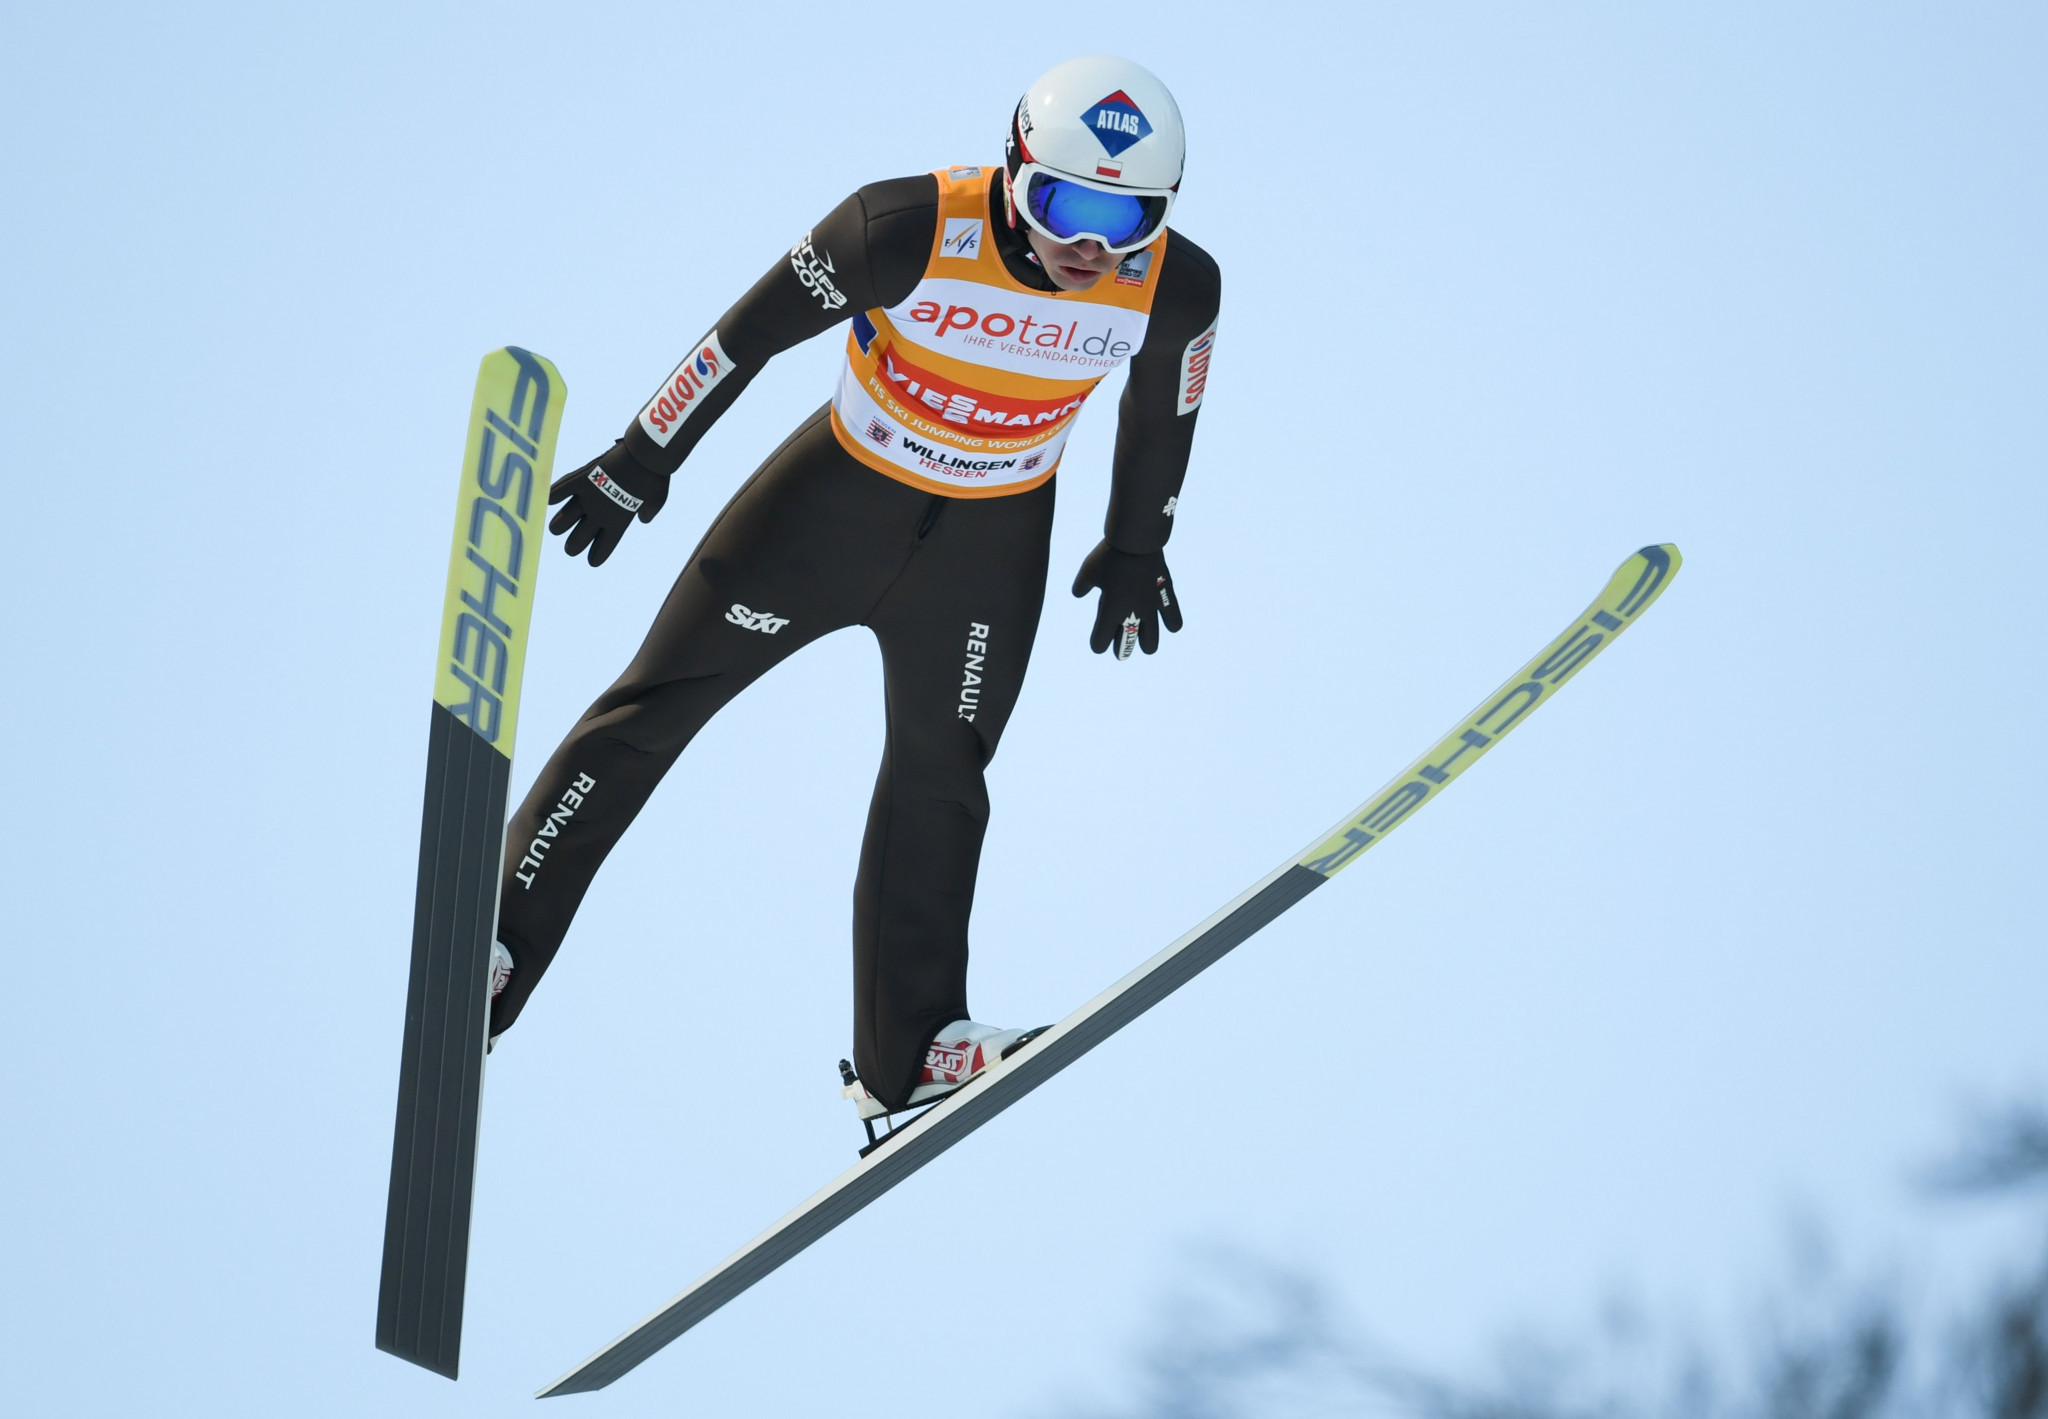 Poland triumph in team competition at FIS Ski Jumping World Cup in